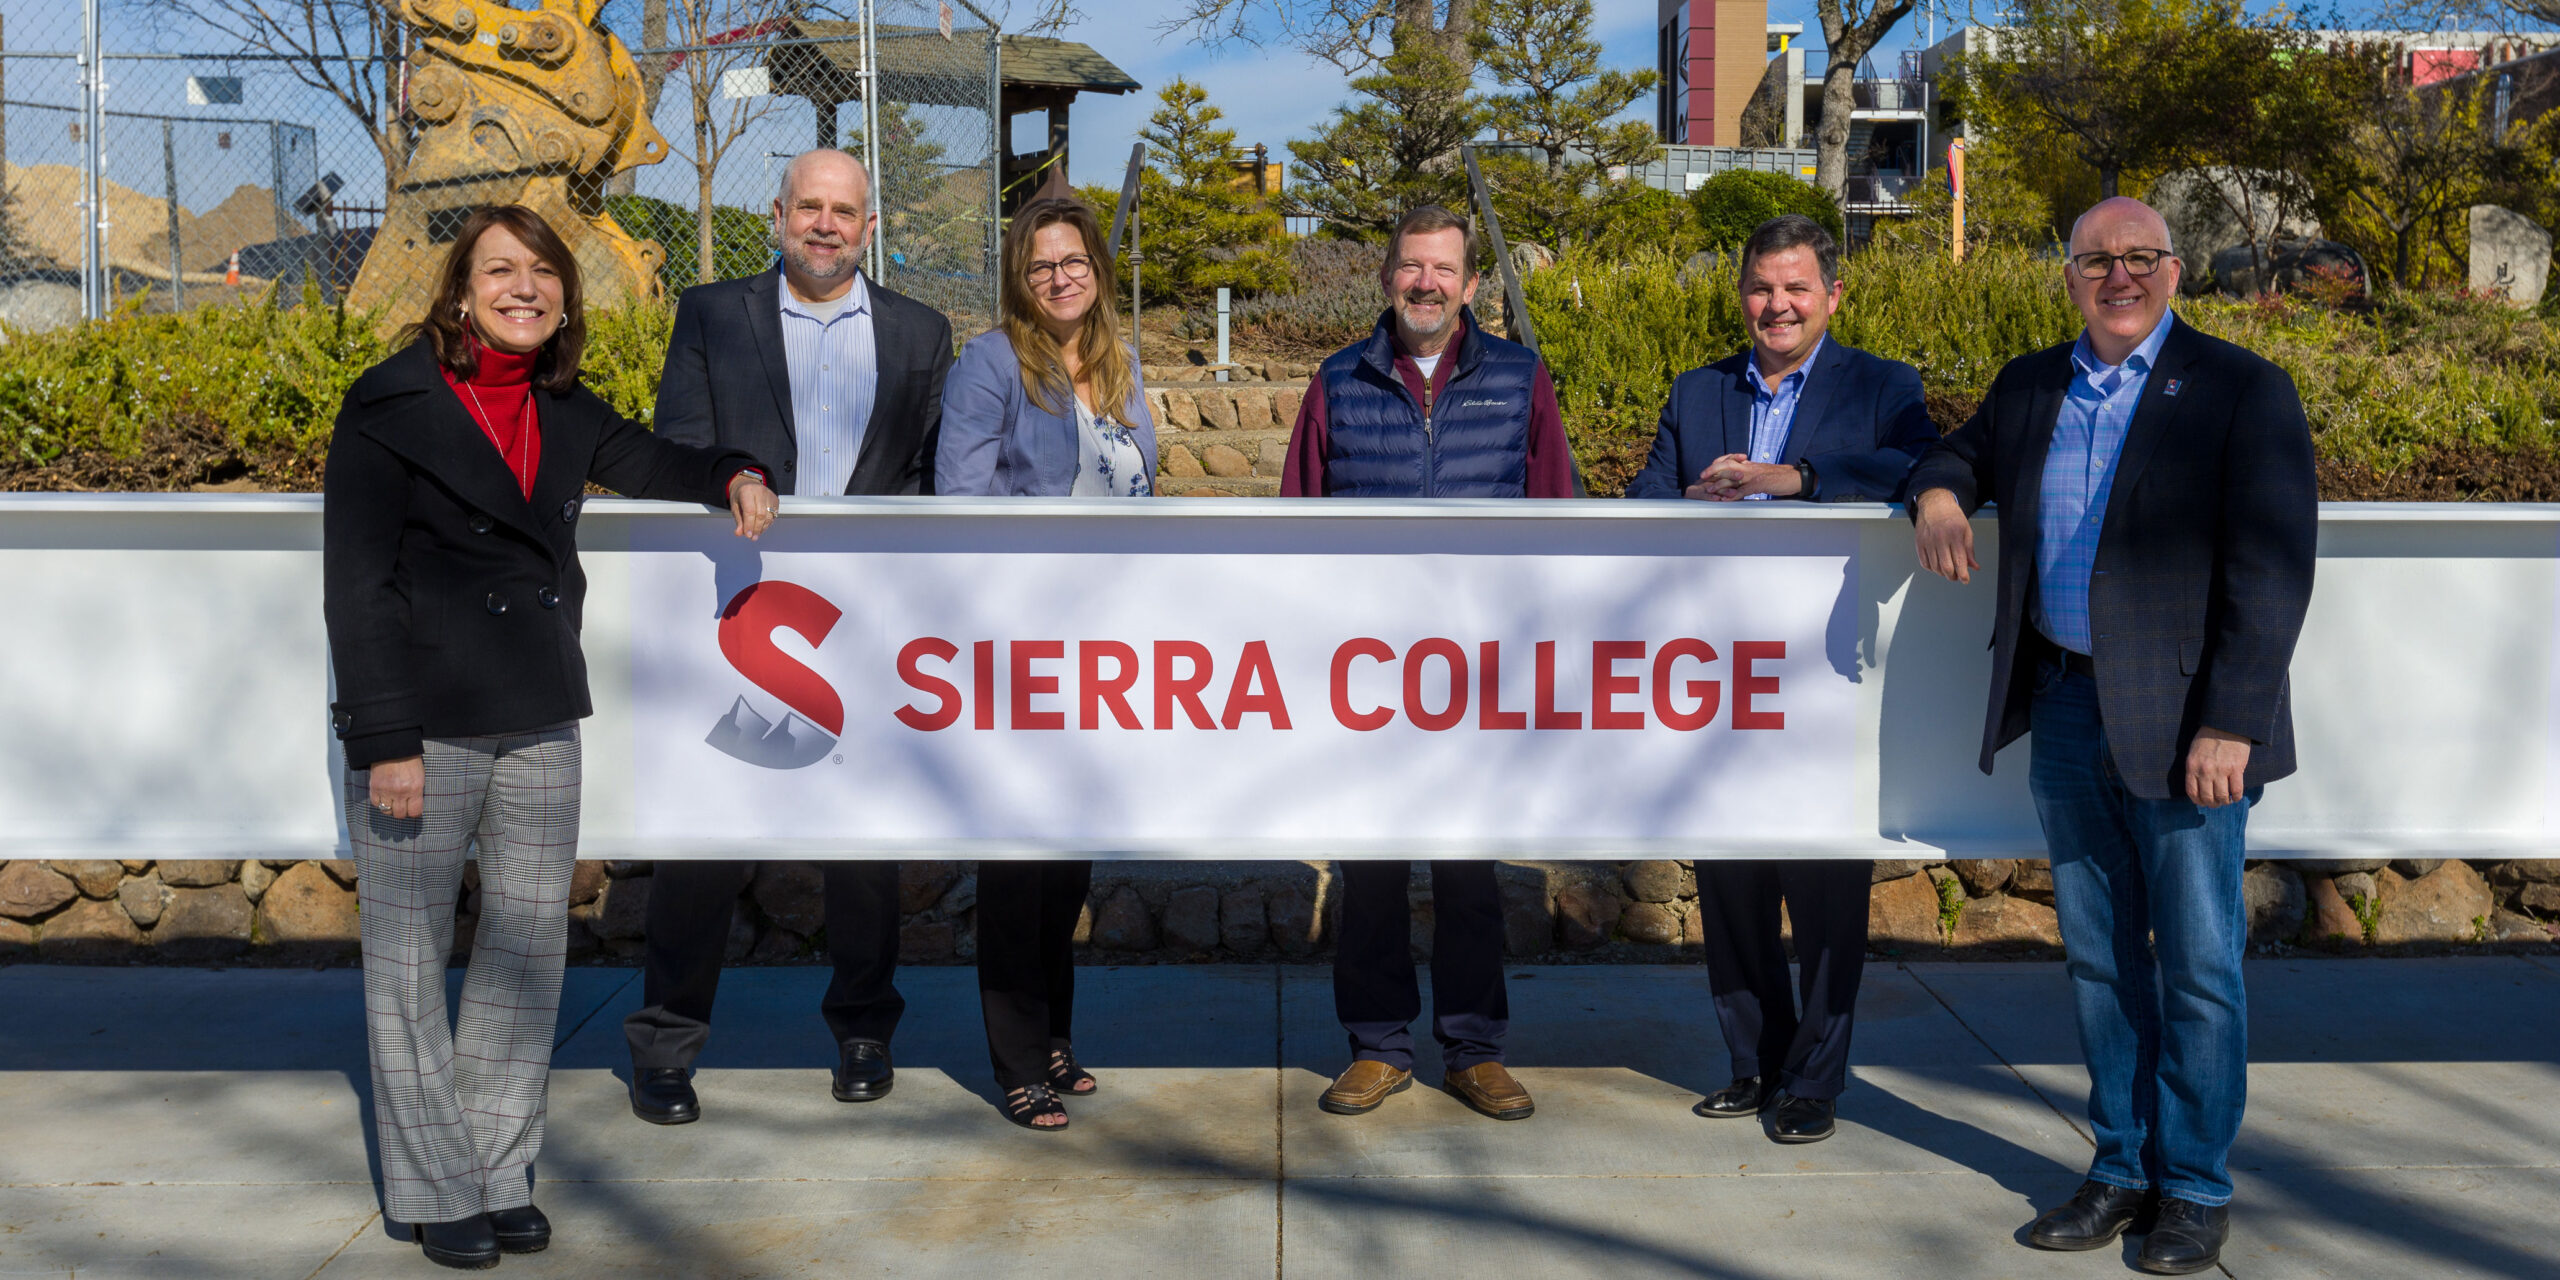 Six Sierra College executives and board members pose with the signed beam.